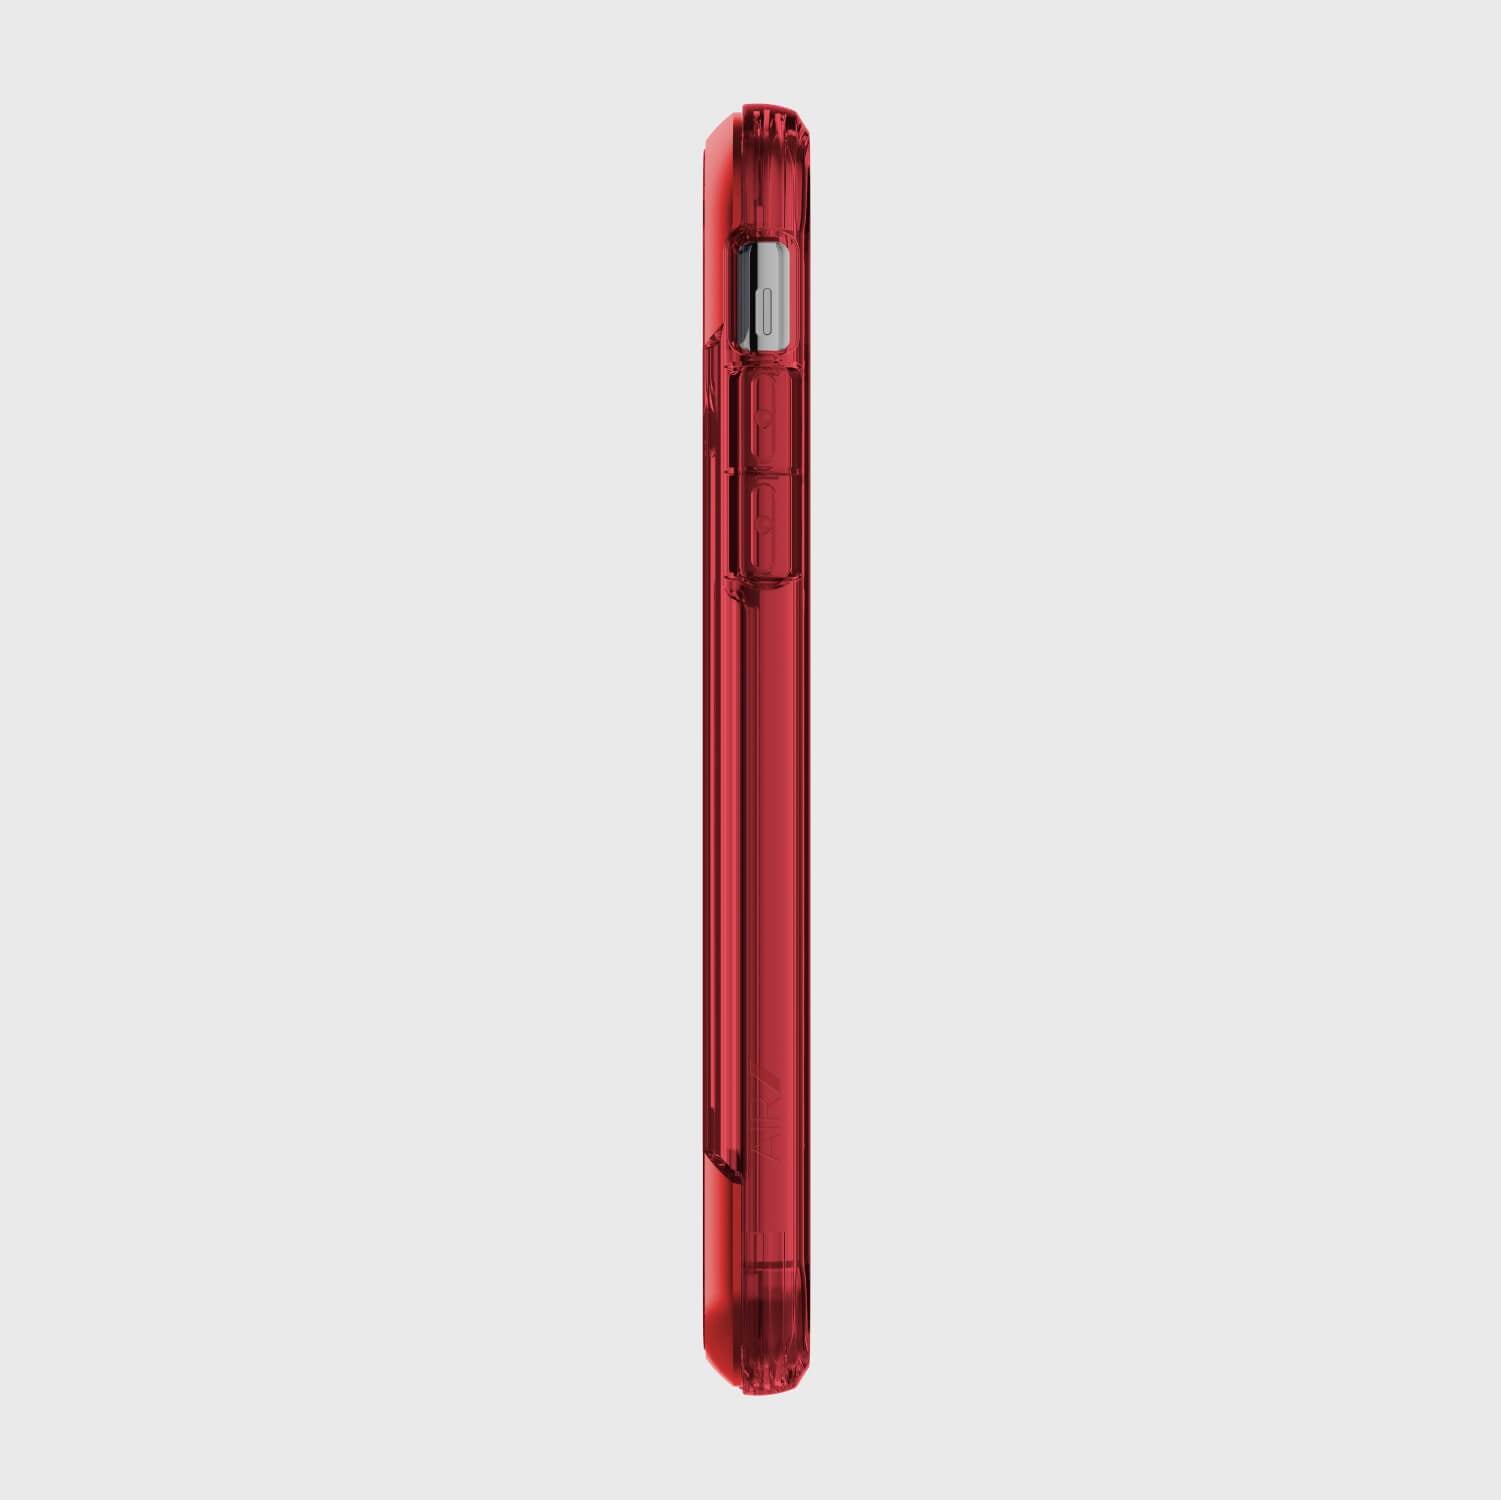 A Raptic AIR red iPhone 11 Pro Case providing drop protection on a white background.